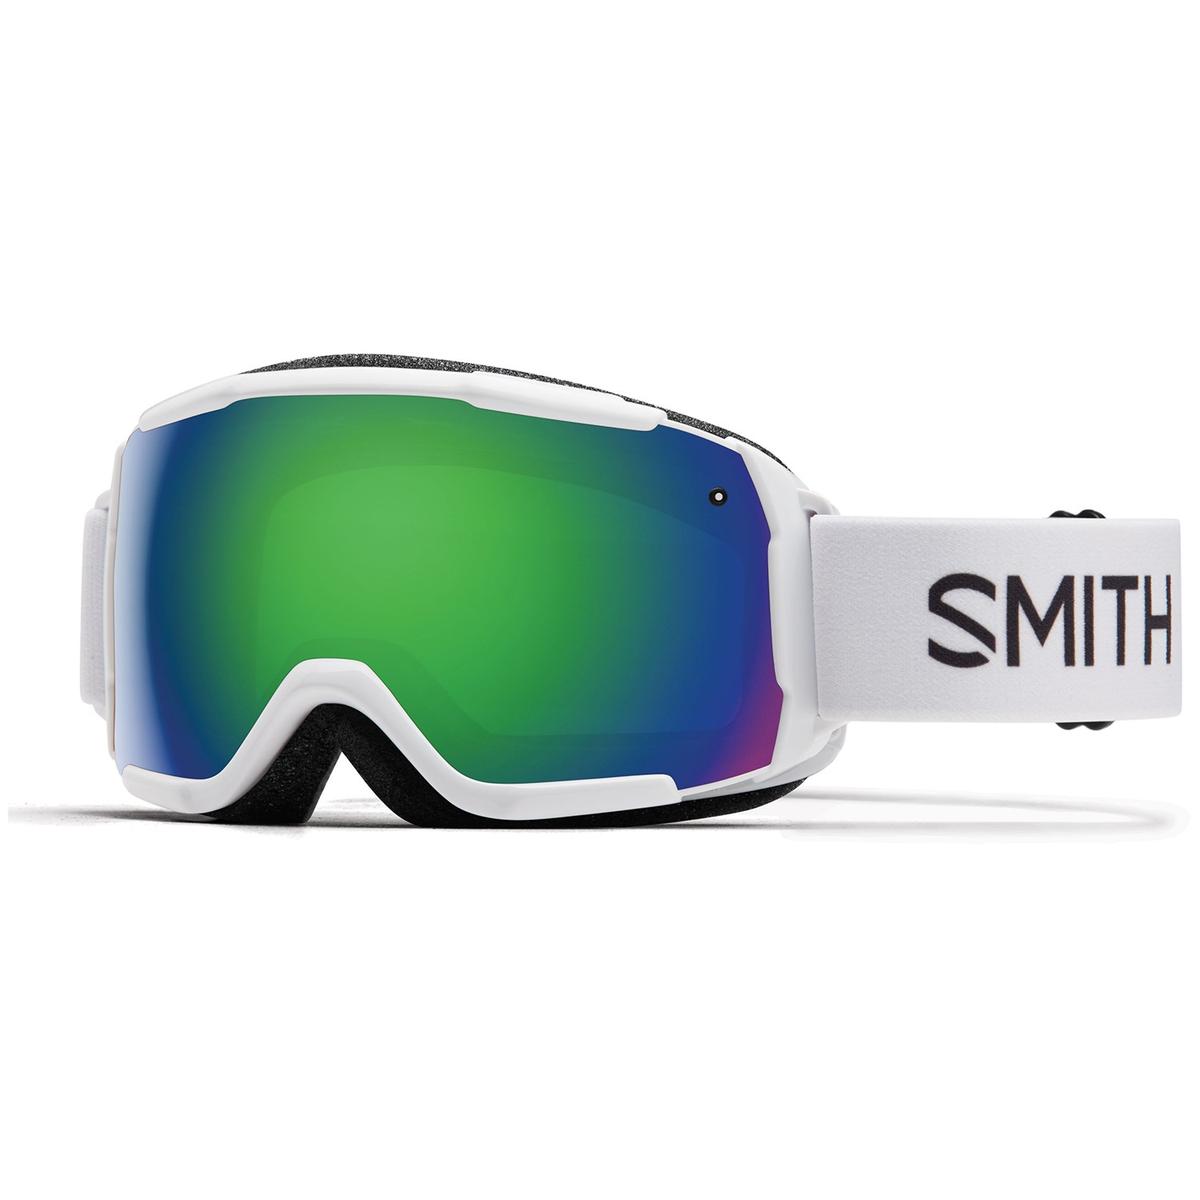 Smith Grom Kid's Goggles